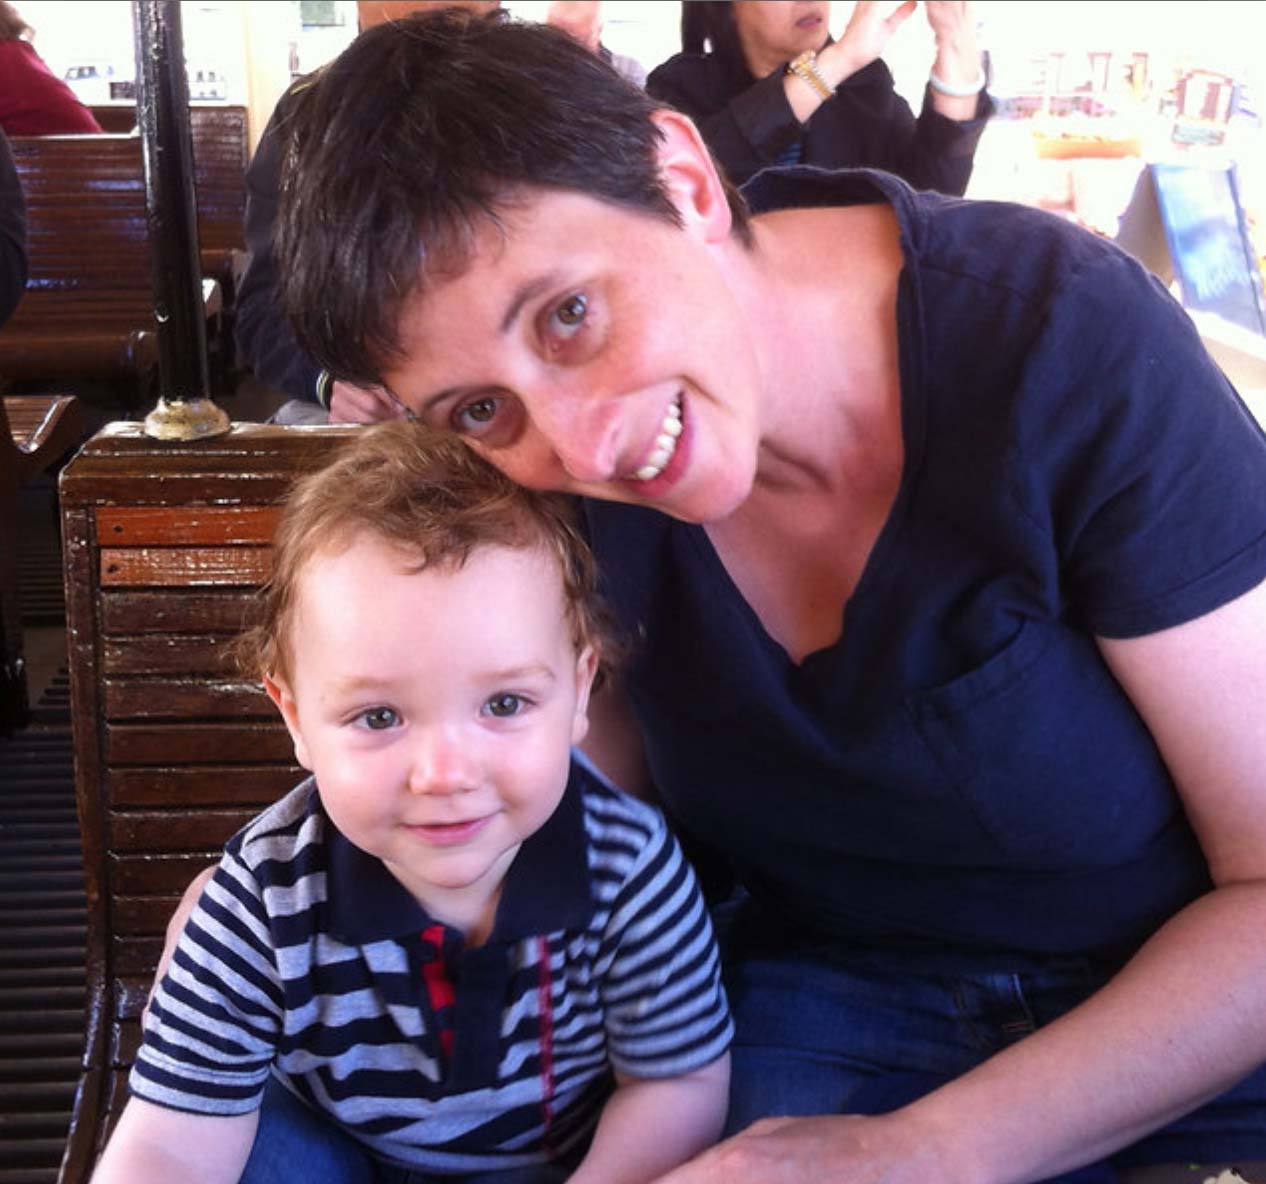 Clare and her son from Twigs magazine